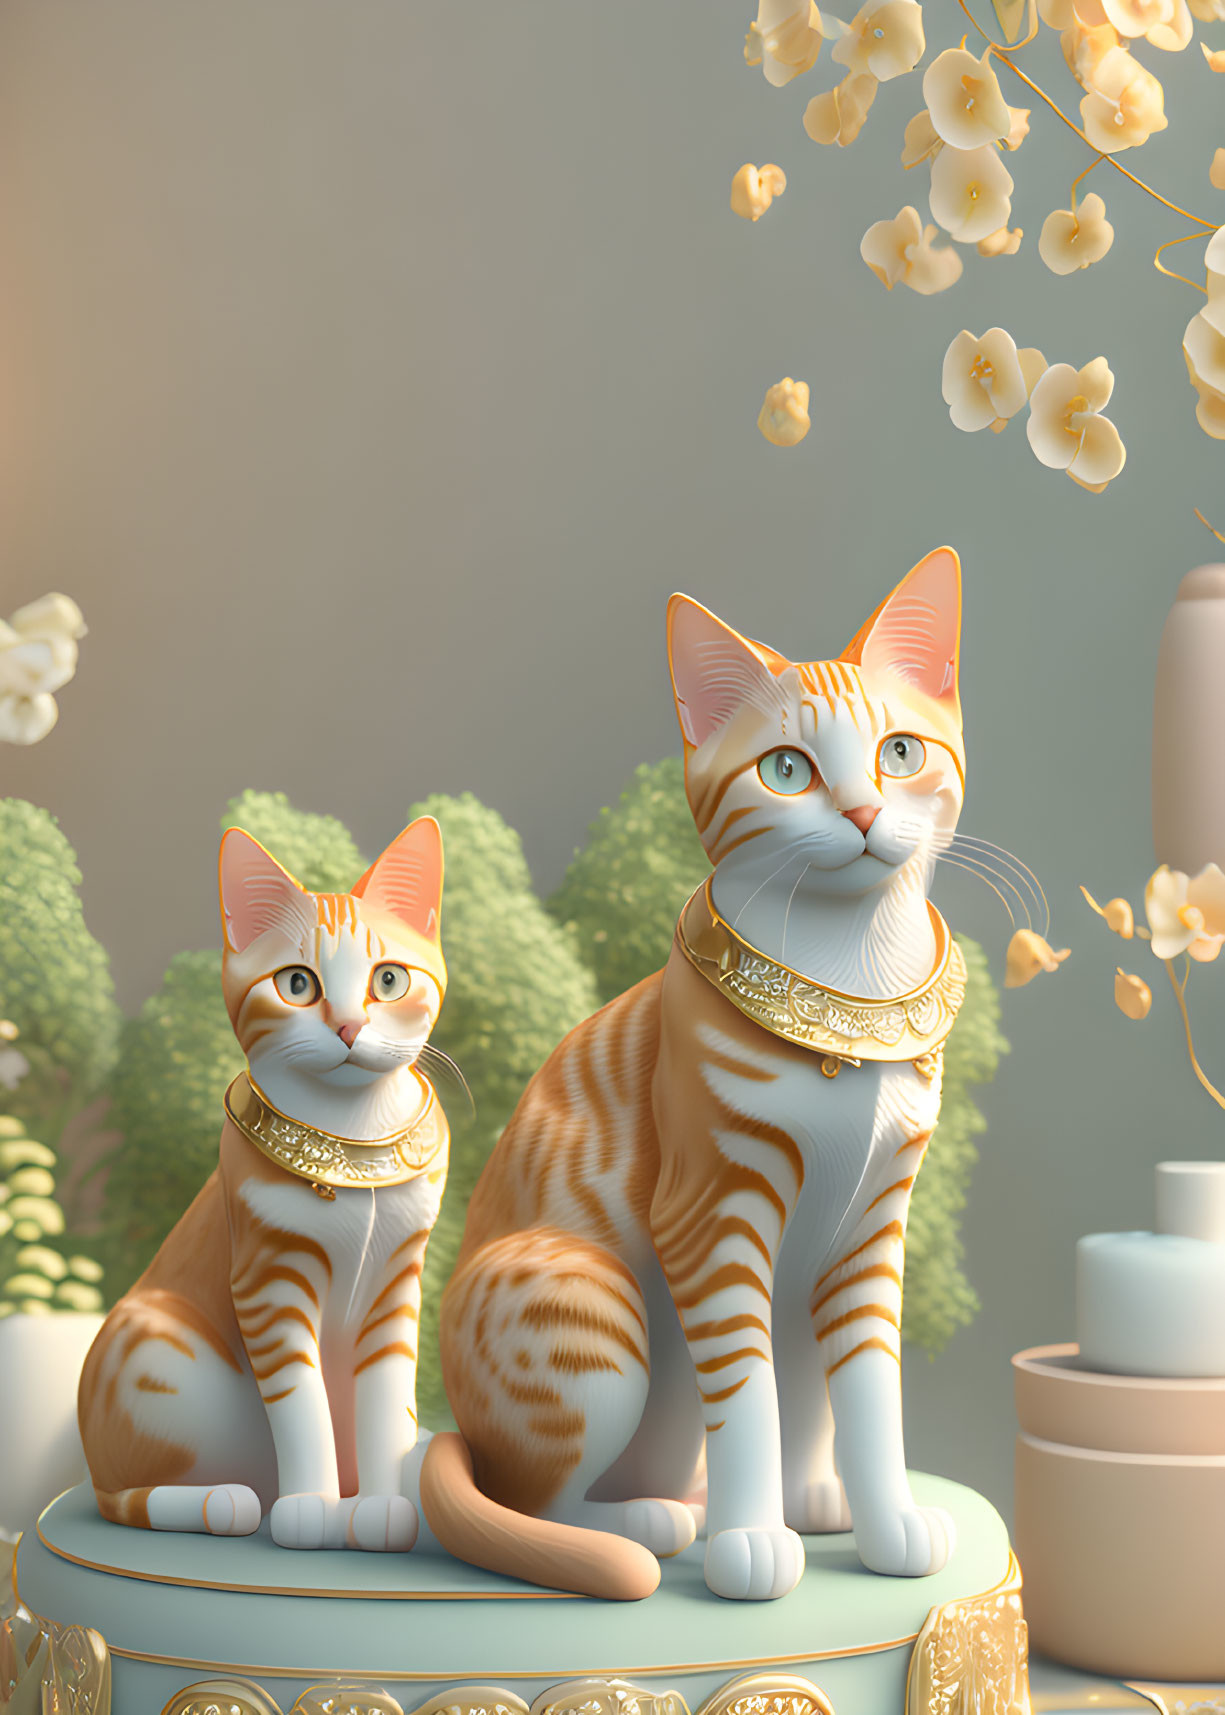 Orange and White Striped Cats with Golden Necklaces Surrounded by Flowers